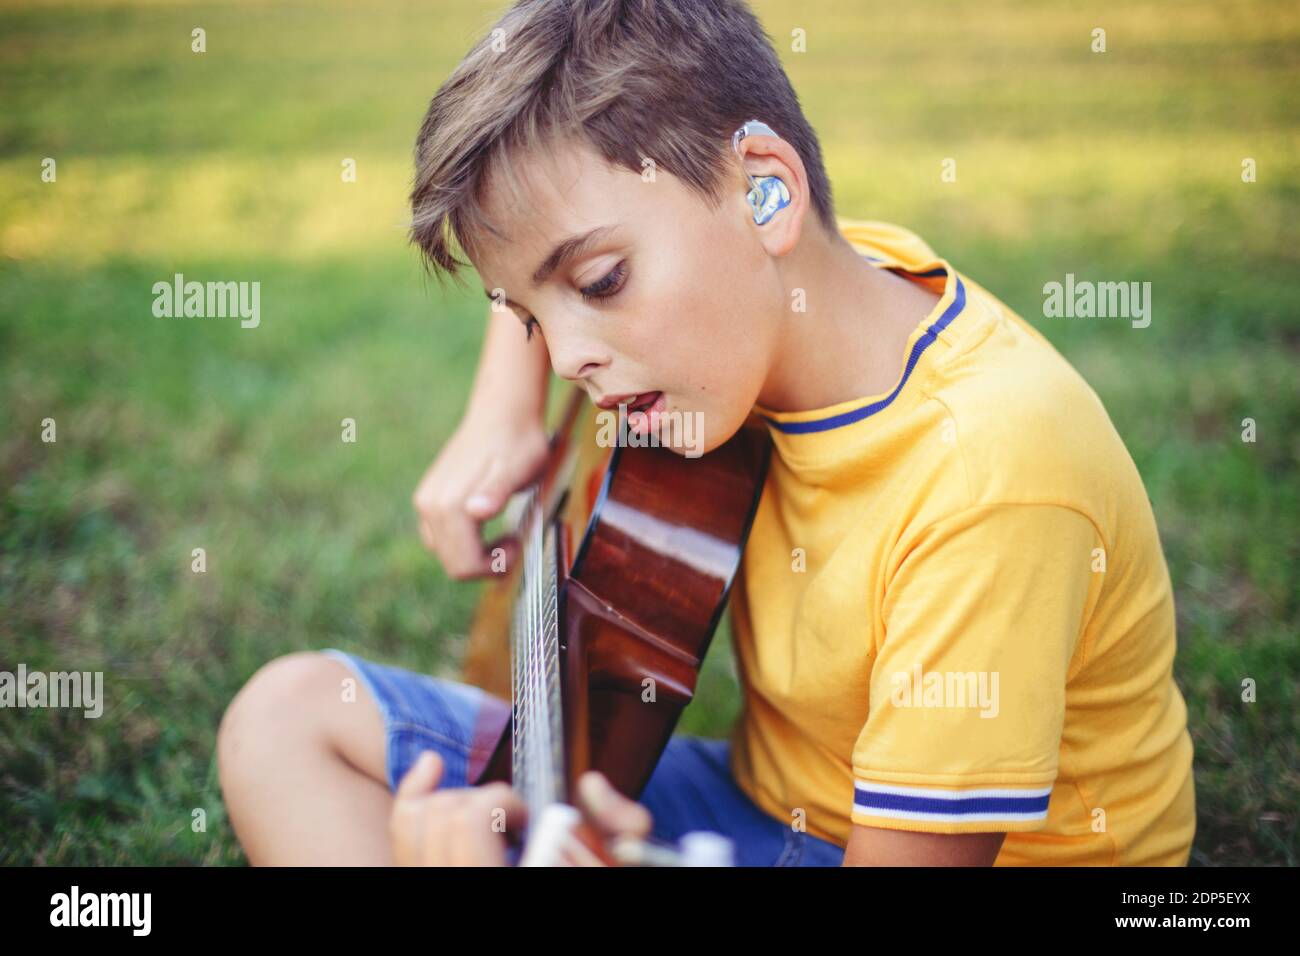 Hard of hearing preteen boy playing guitar and singing. Child with hearing aids in ears playing music and singing song in park. Hobby art activity for Stock Photo